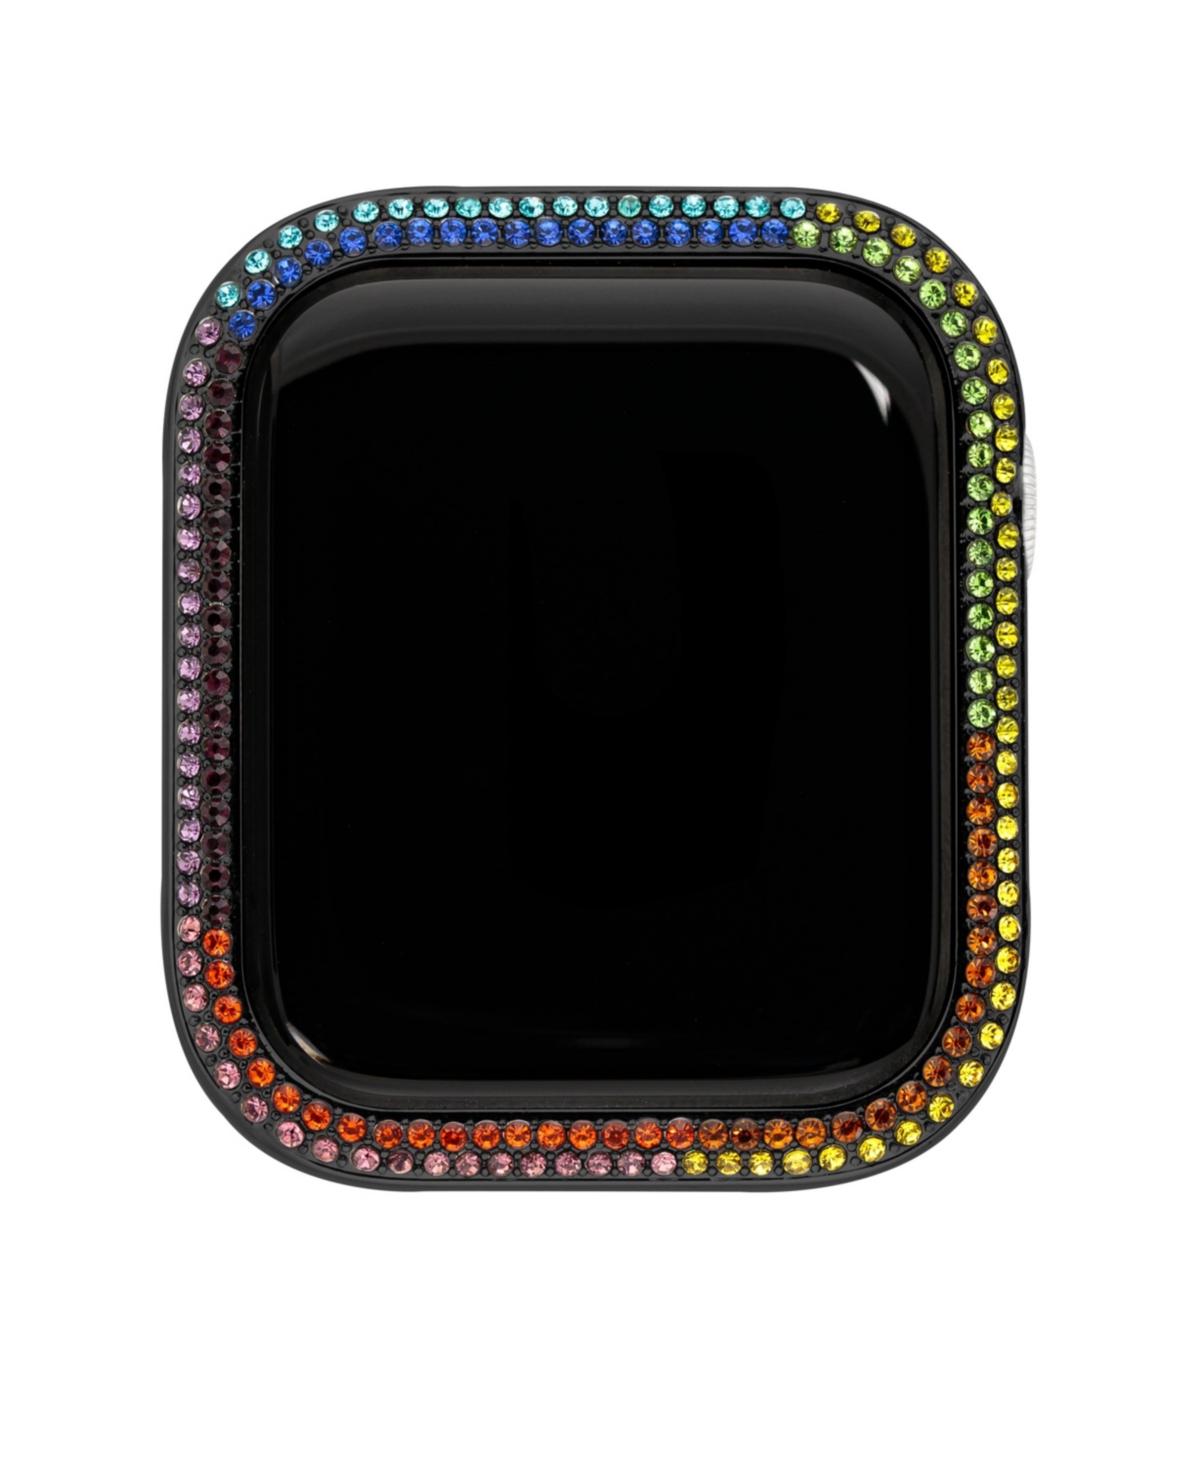 Women's Mixed Metal Apple Watch Bumper Accented with Rainbow Crystals, 40mm - Silver